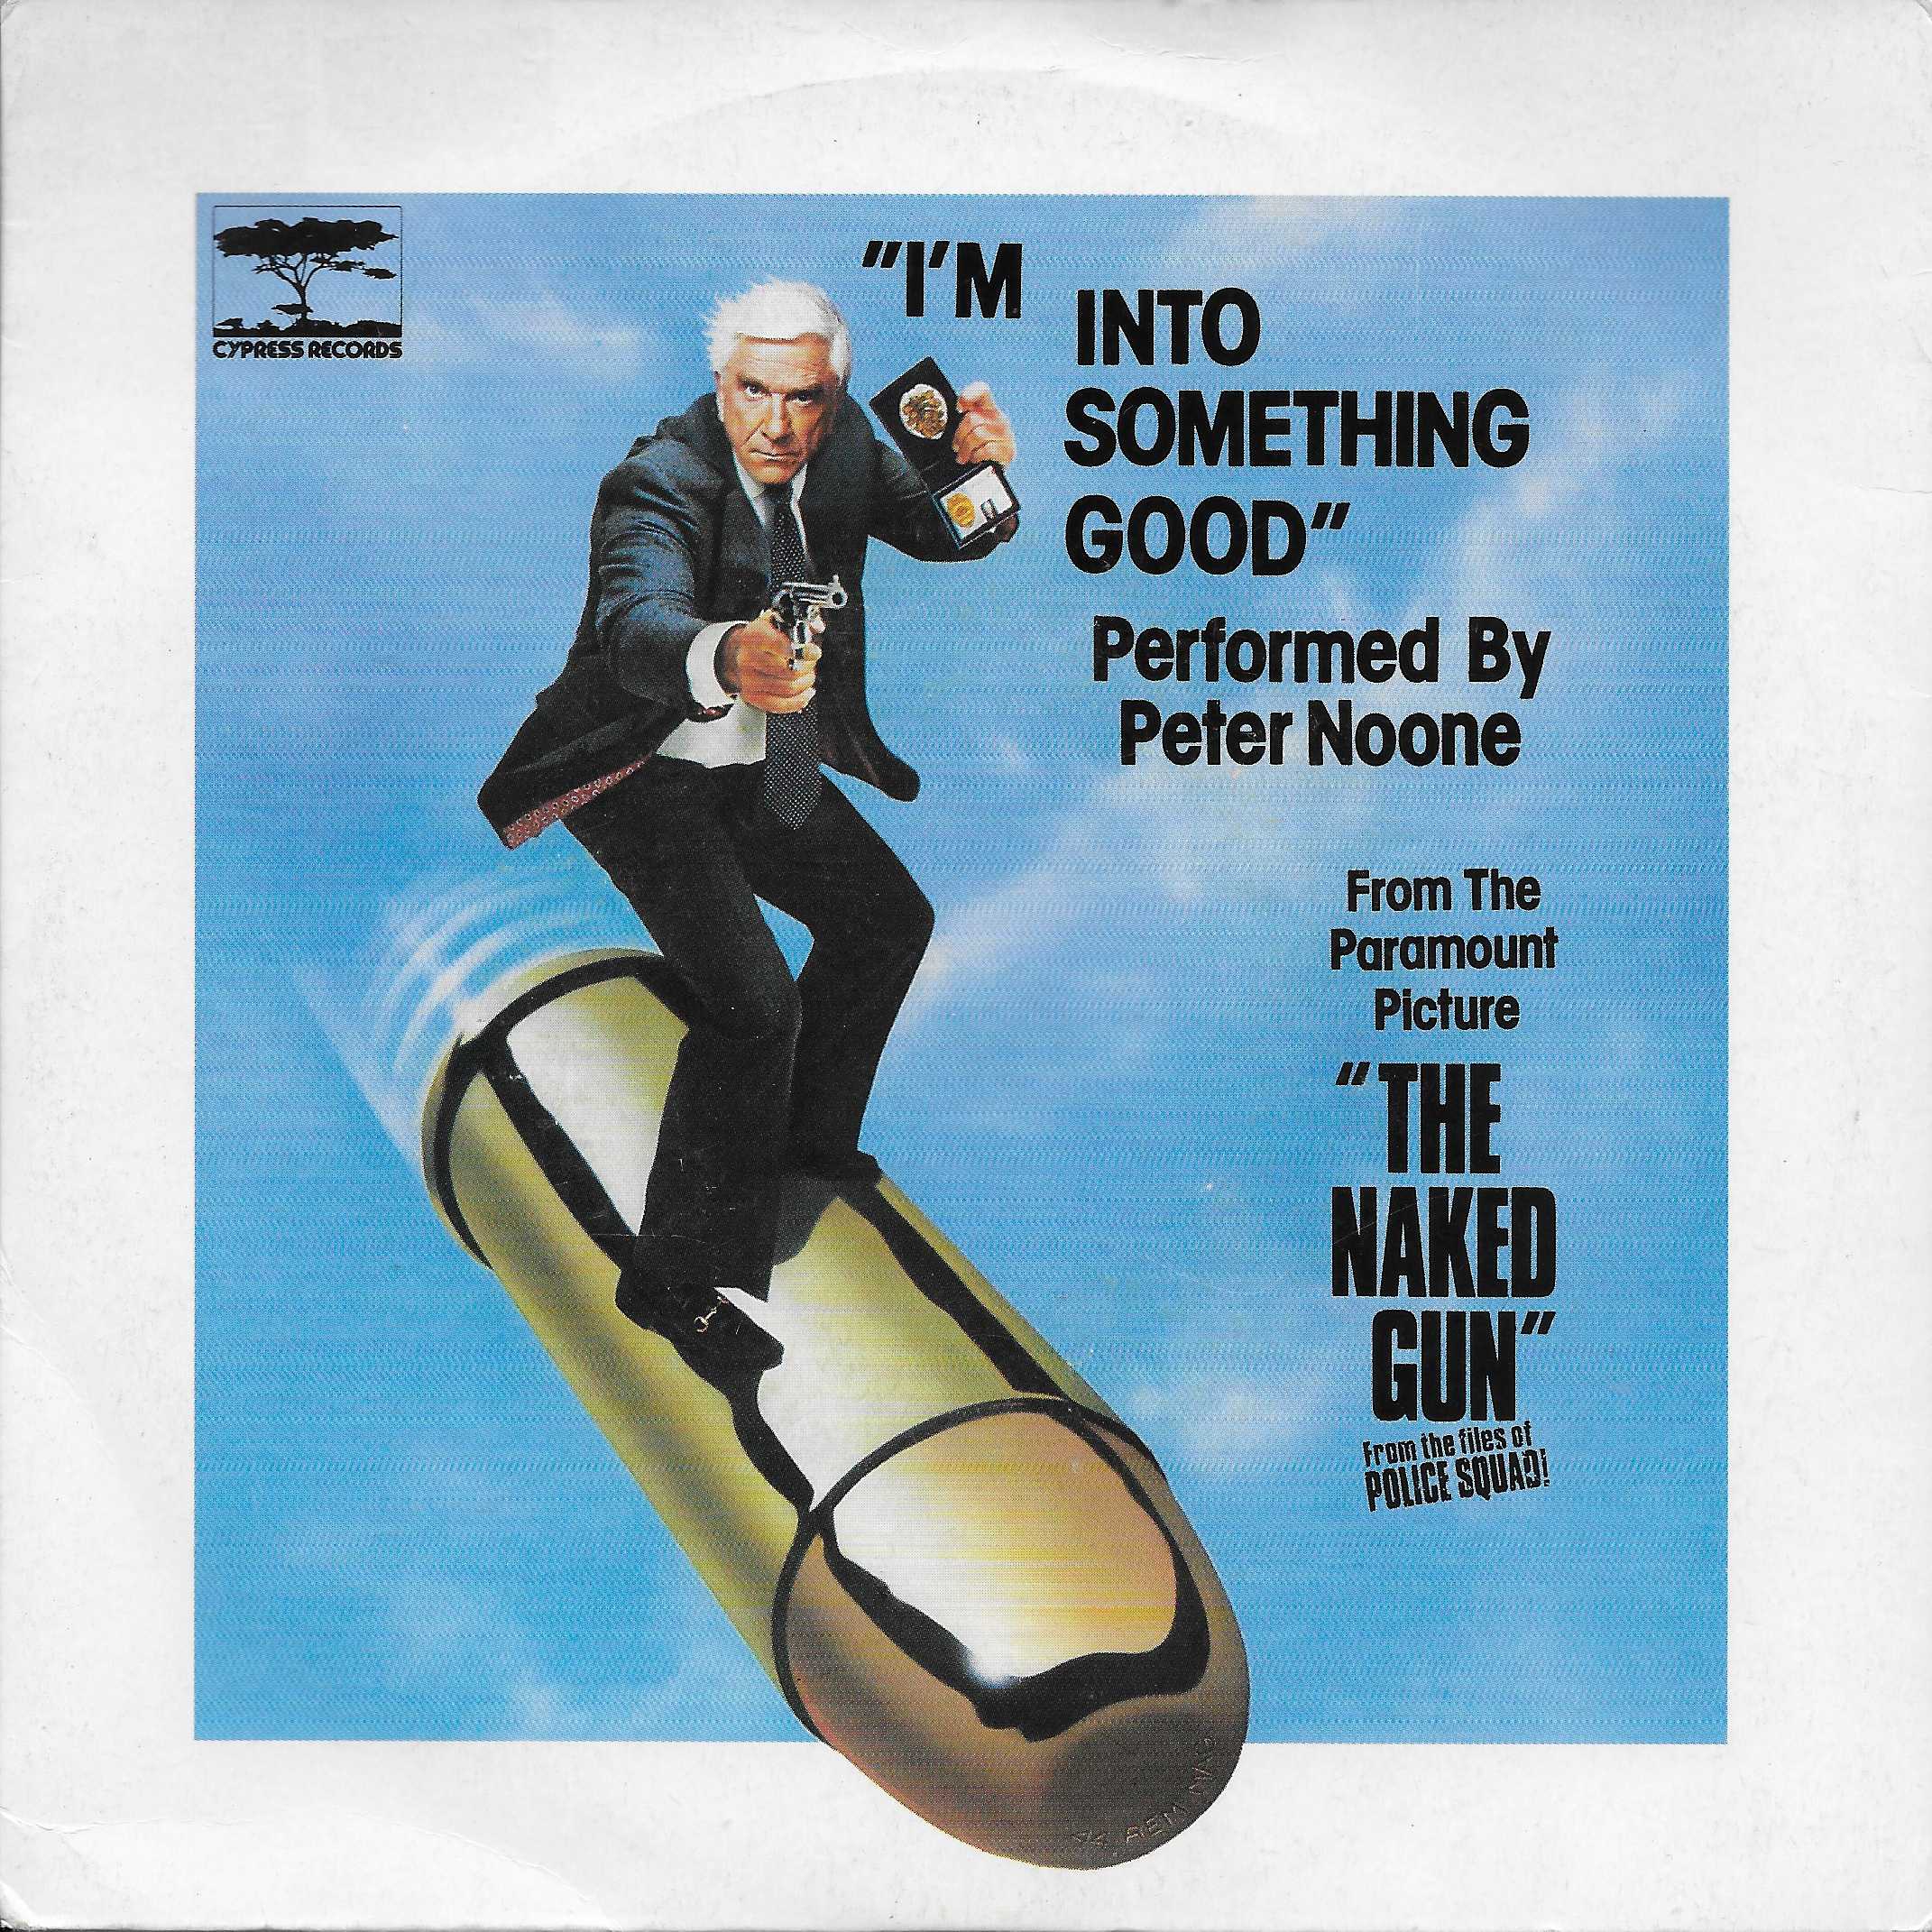 Picture of YY 5004 I'm into something good (The naked gun) by artist Gerry Goffin / Carole King / Peter Noone / Frannie Golde / Ailee Willis from ITV, Channel 4 and Channel 5 library